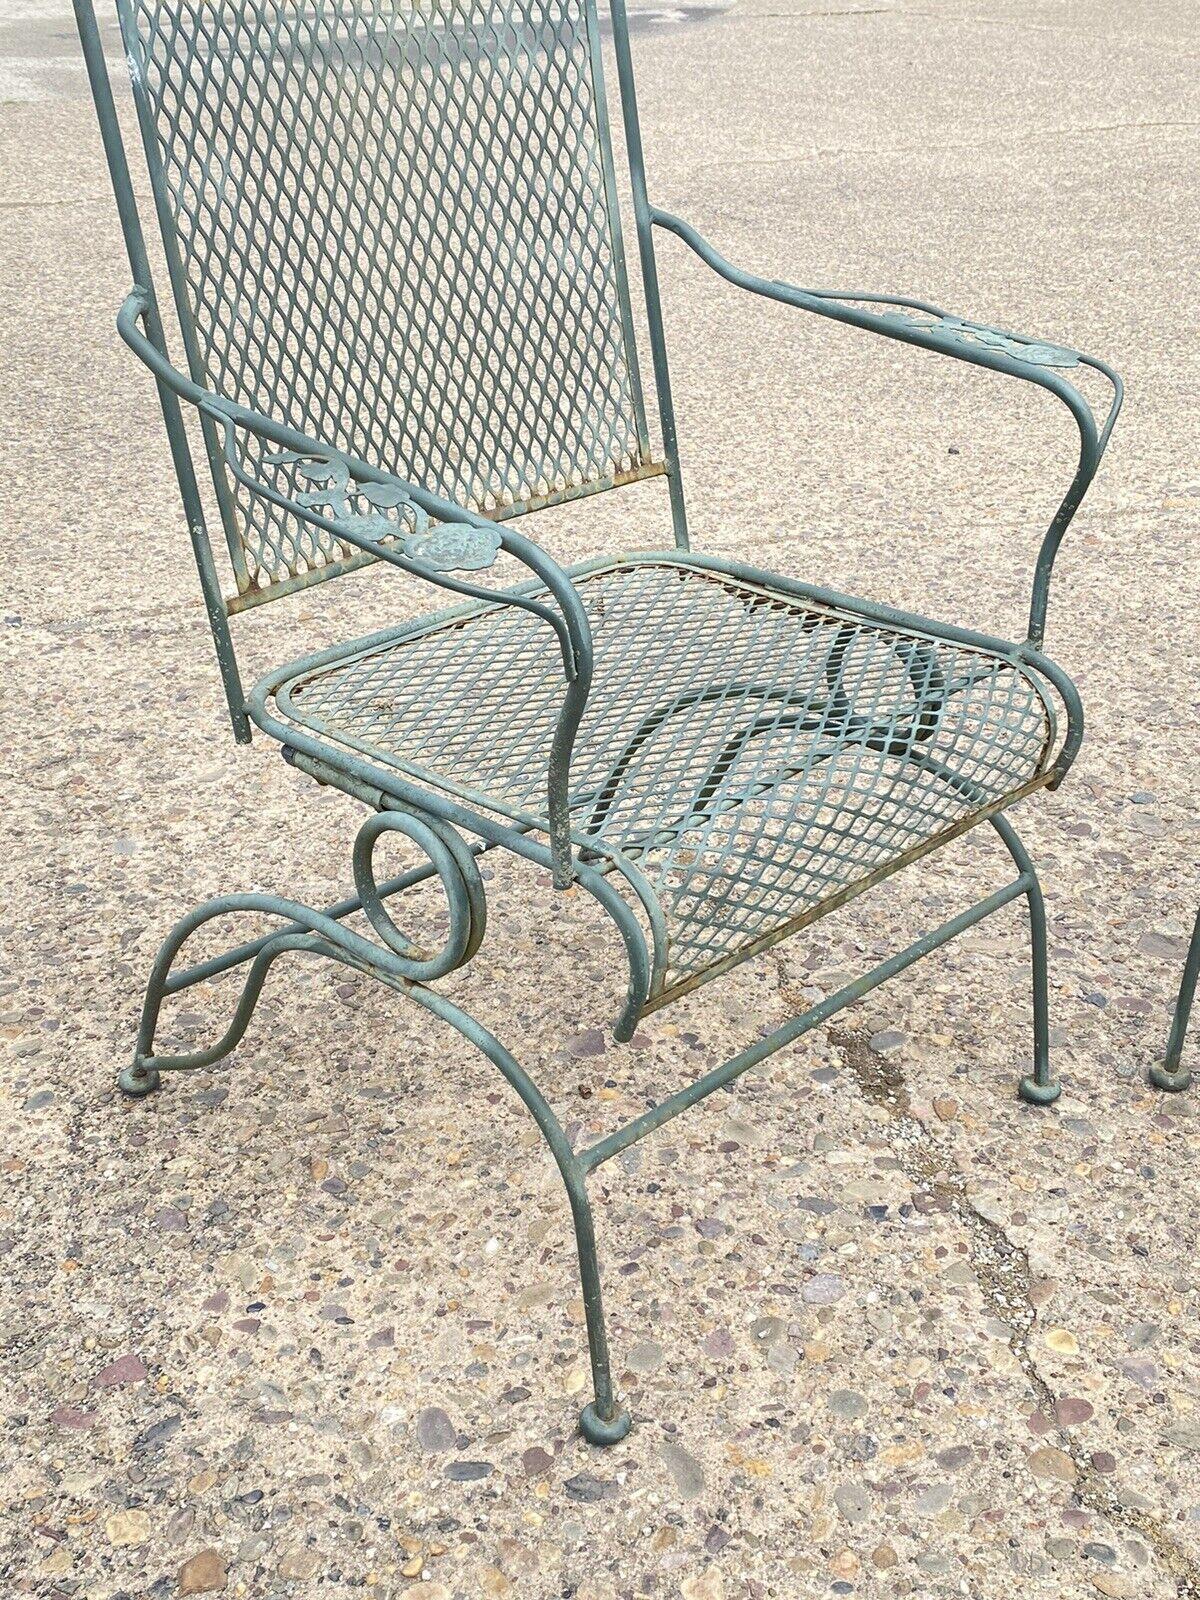 20th Century Meadowcraft Dogwood Green Wrought Iron Outdoor Patio Coil Spring Chairs, Pair For Sale